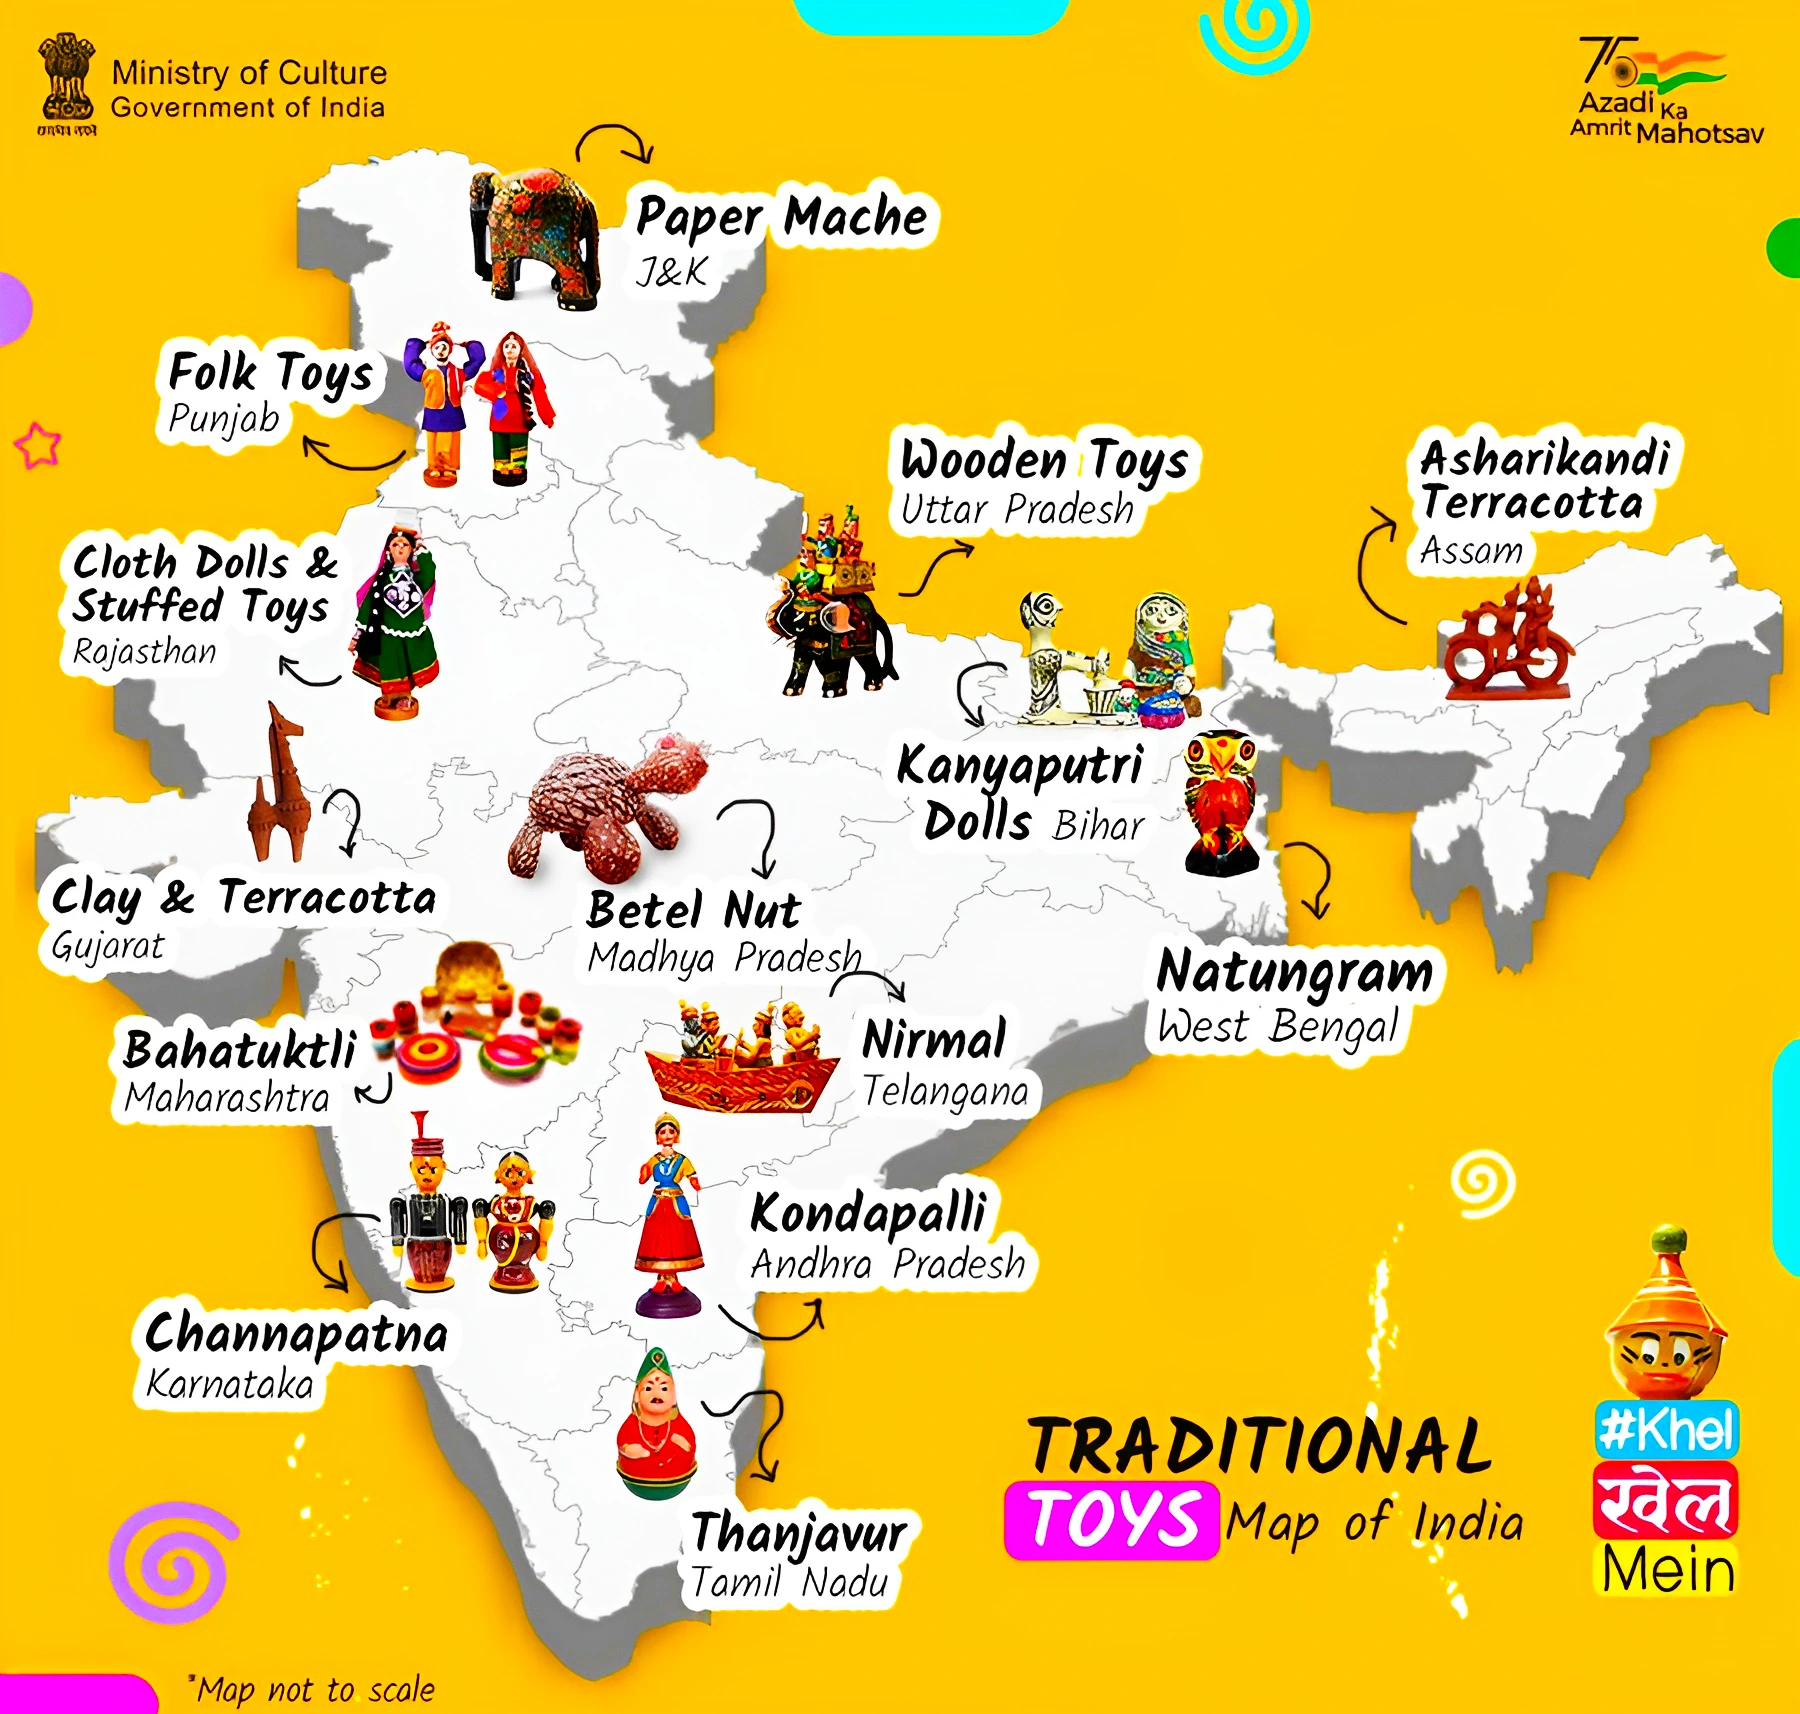 Toy Industry in India